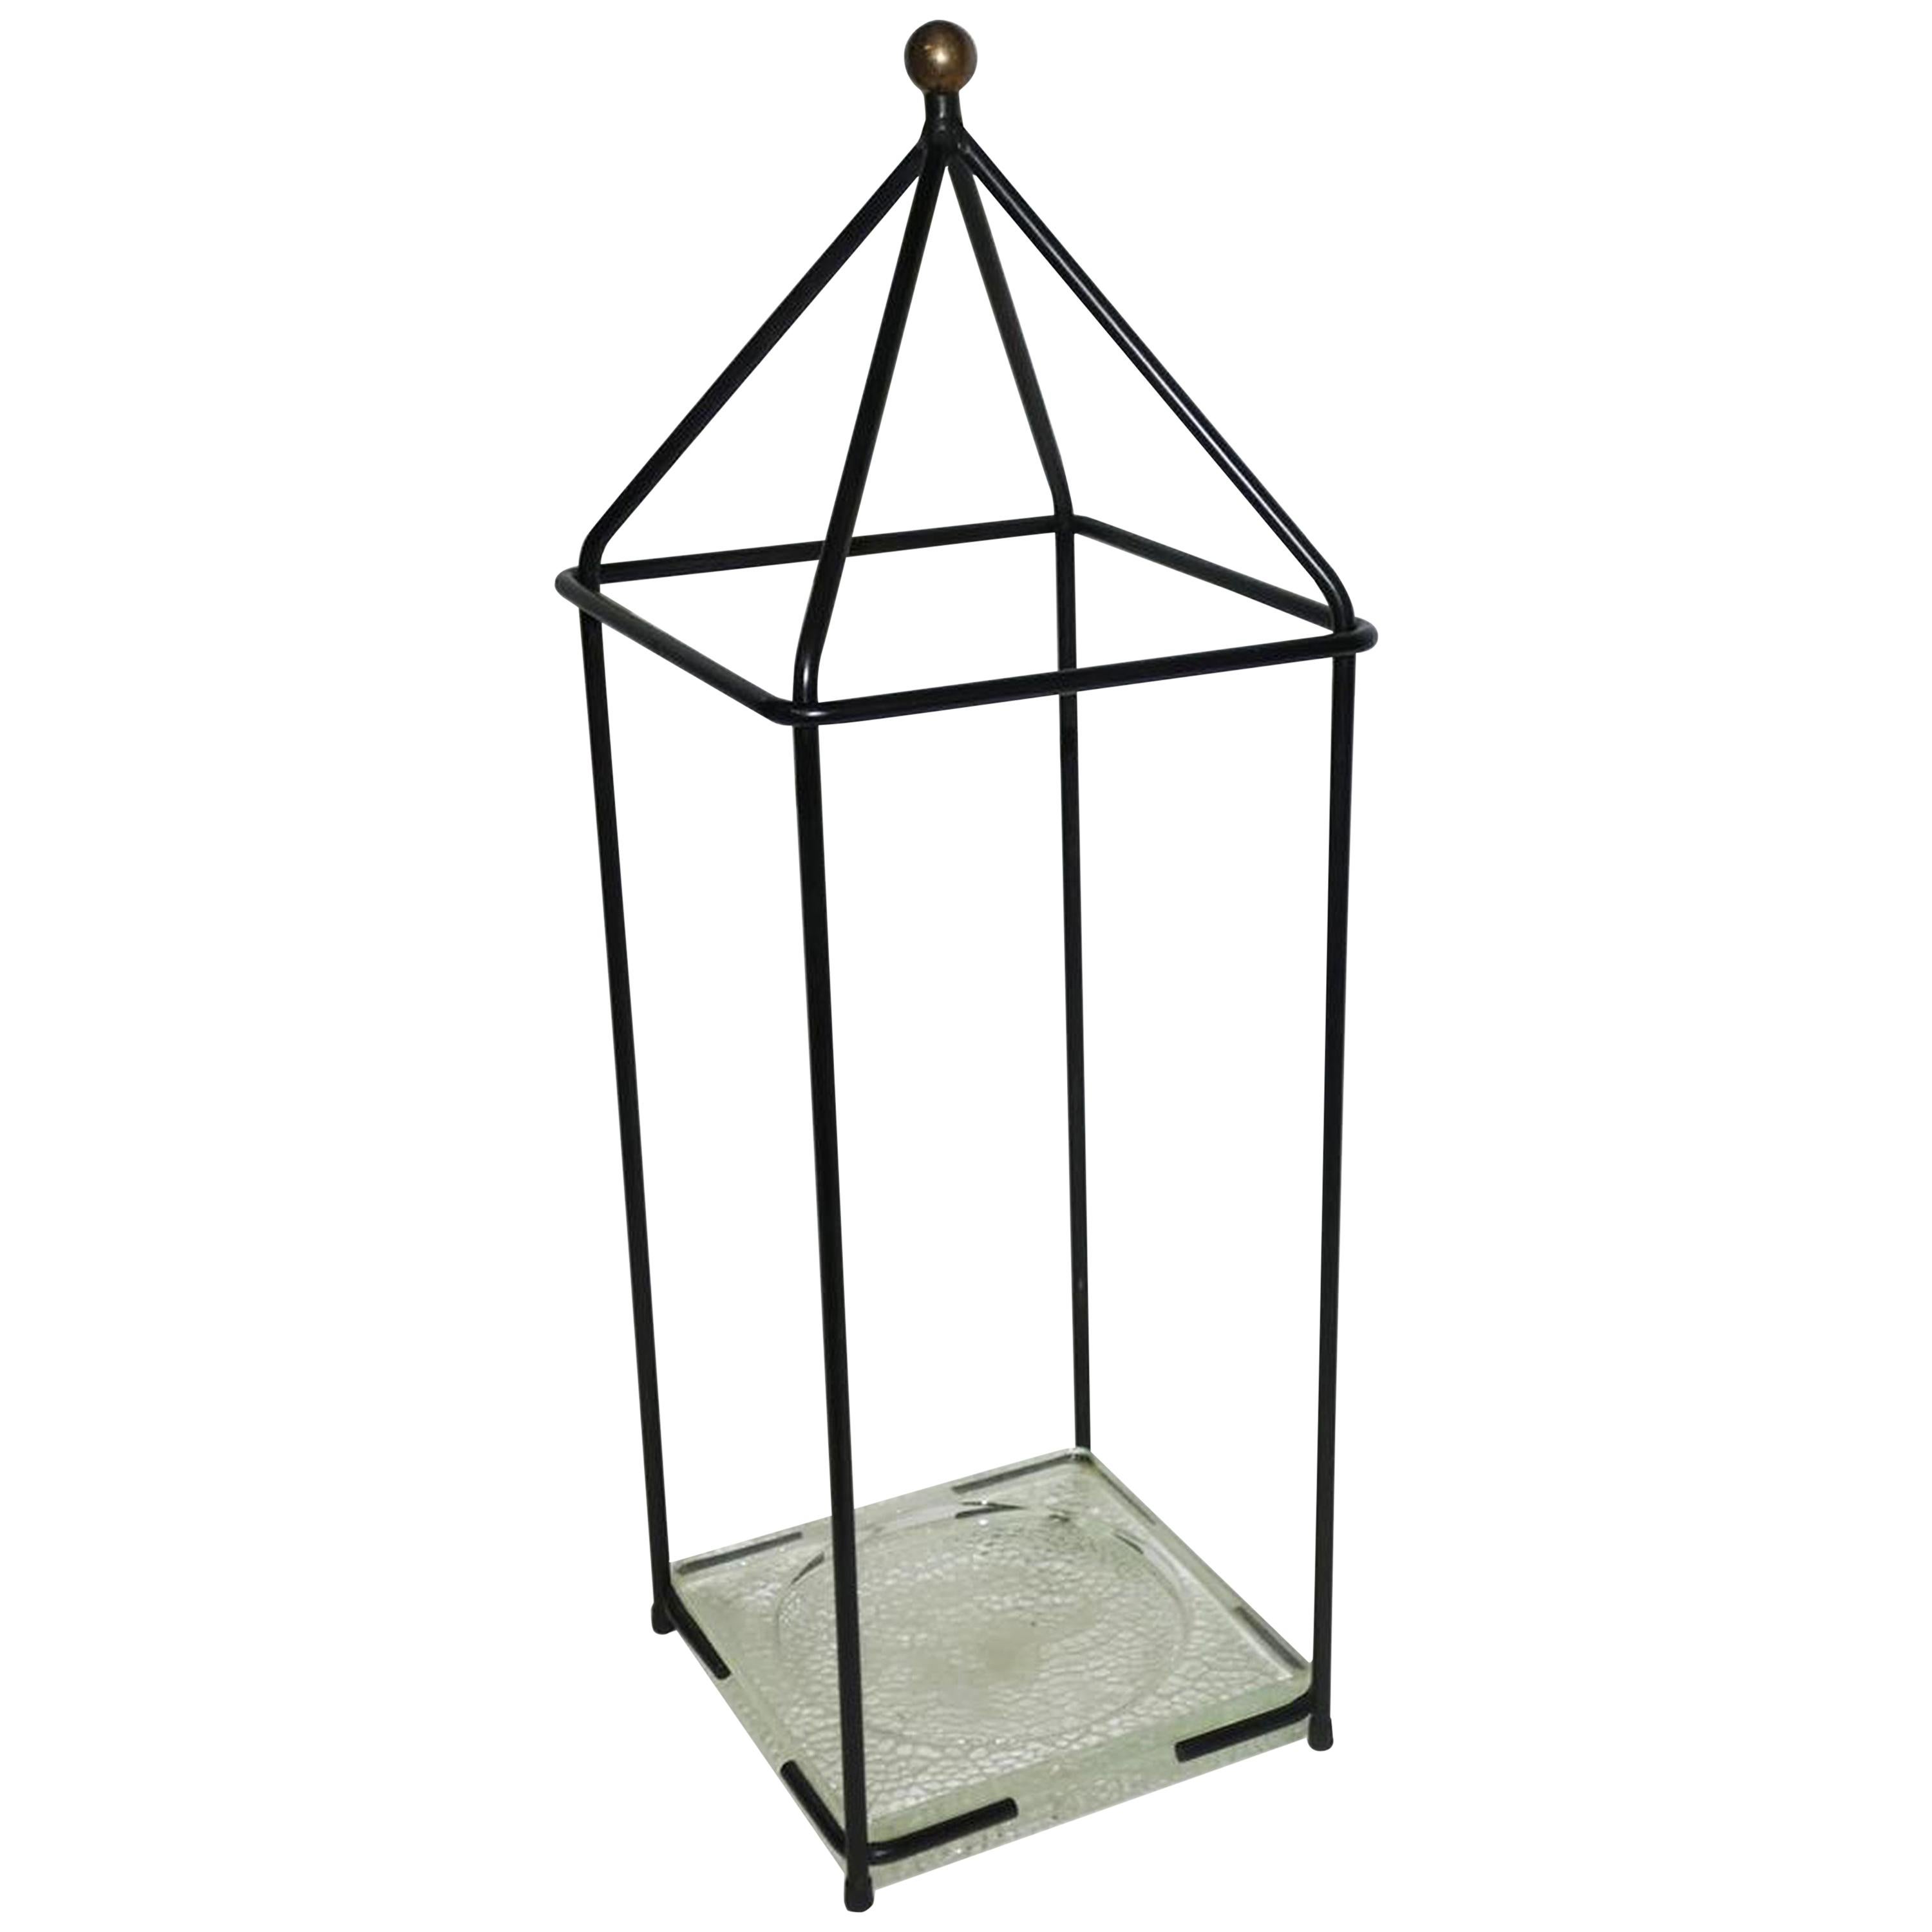 Adnet Jacques Attributed, Umbrella Stand circa 1960 in Lacquered Metal